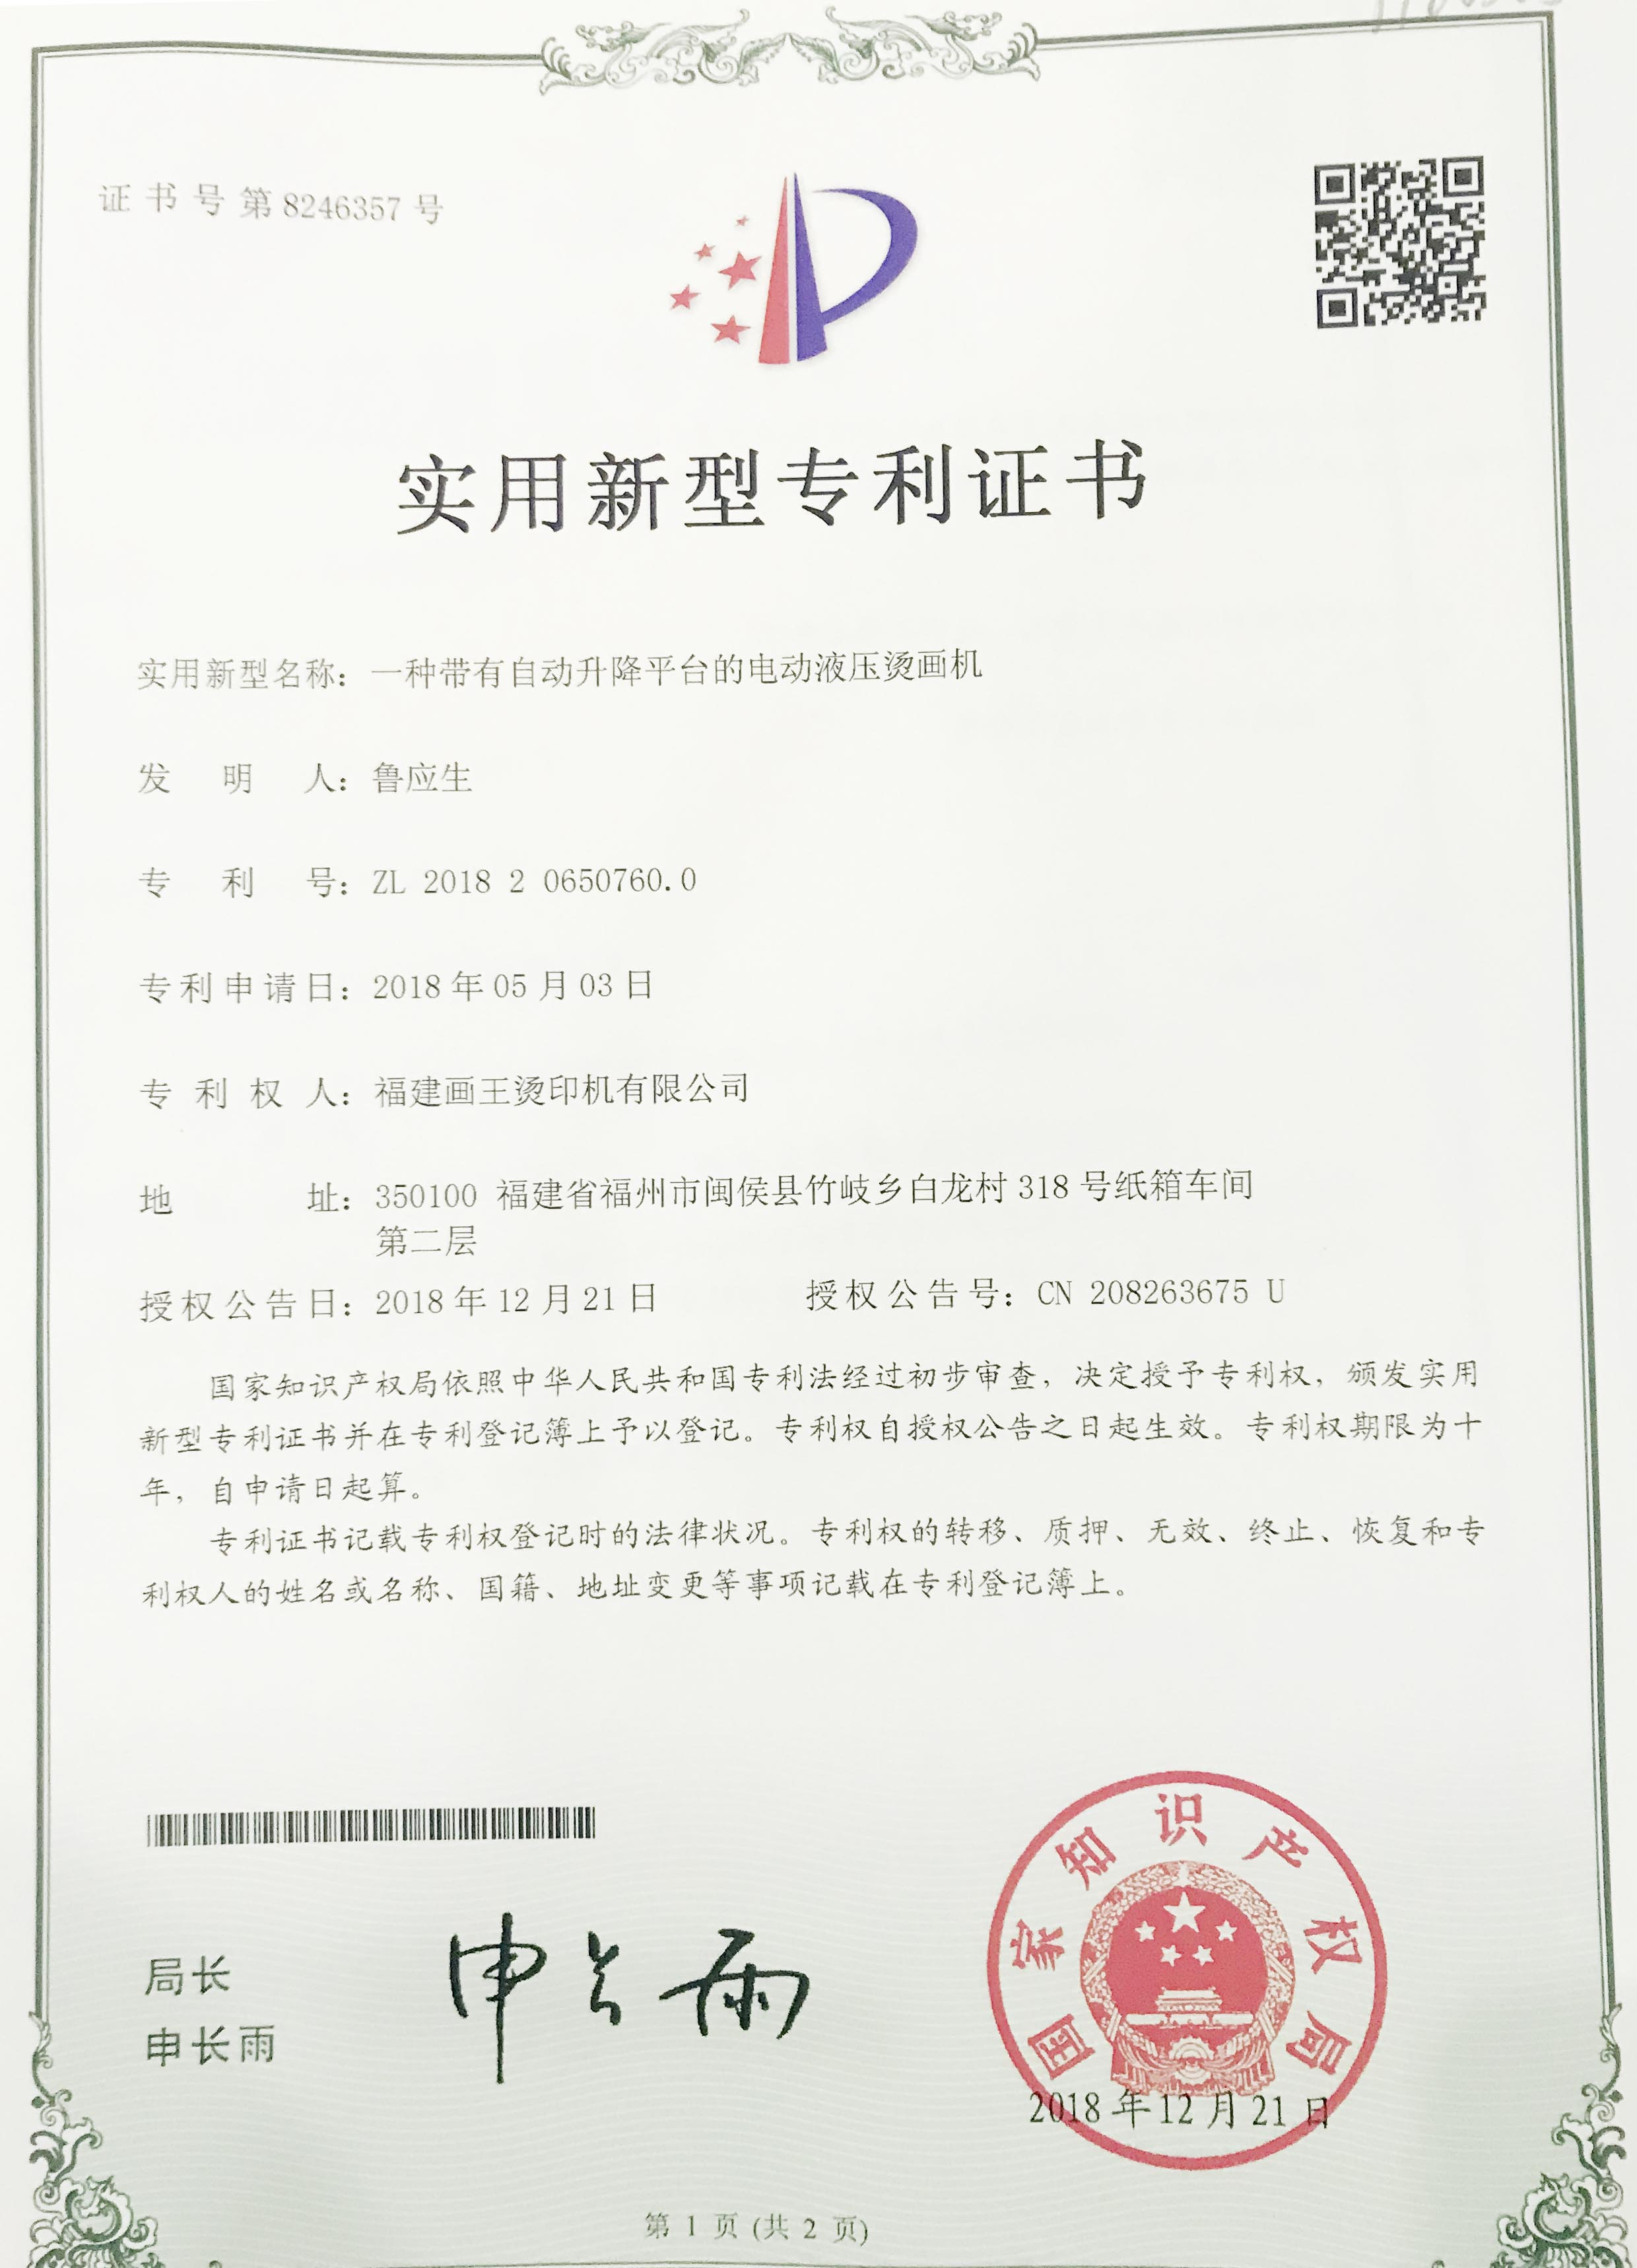 colorking patent certificate